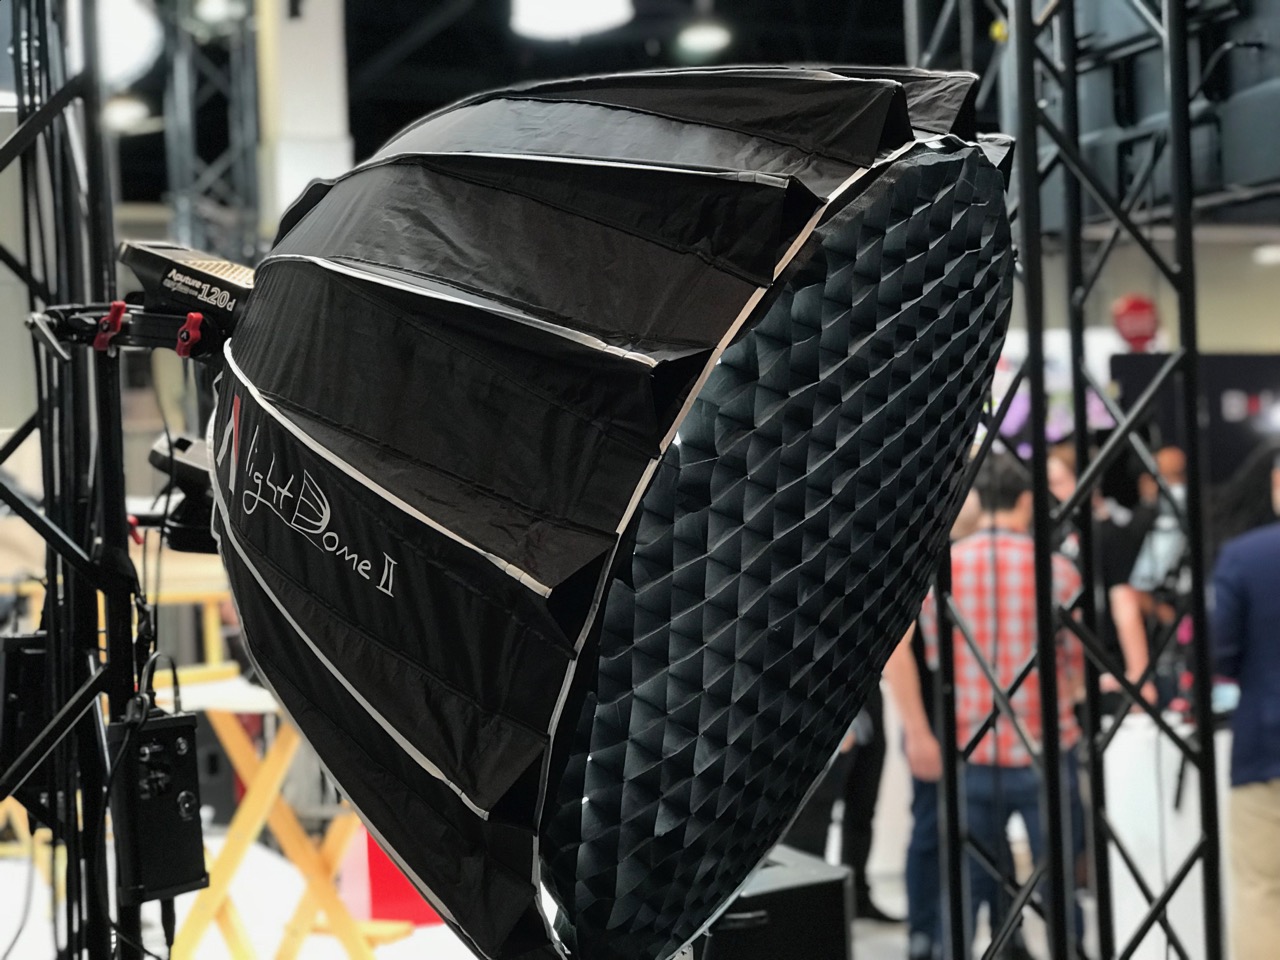 Aputure Light Dome II quick deploy soft box - Newsshooter